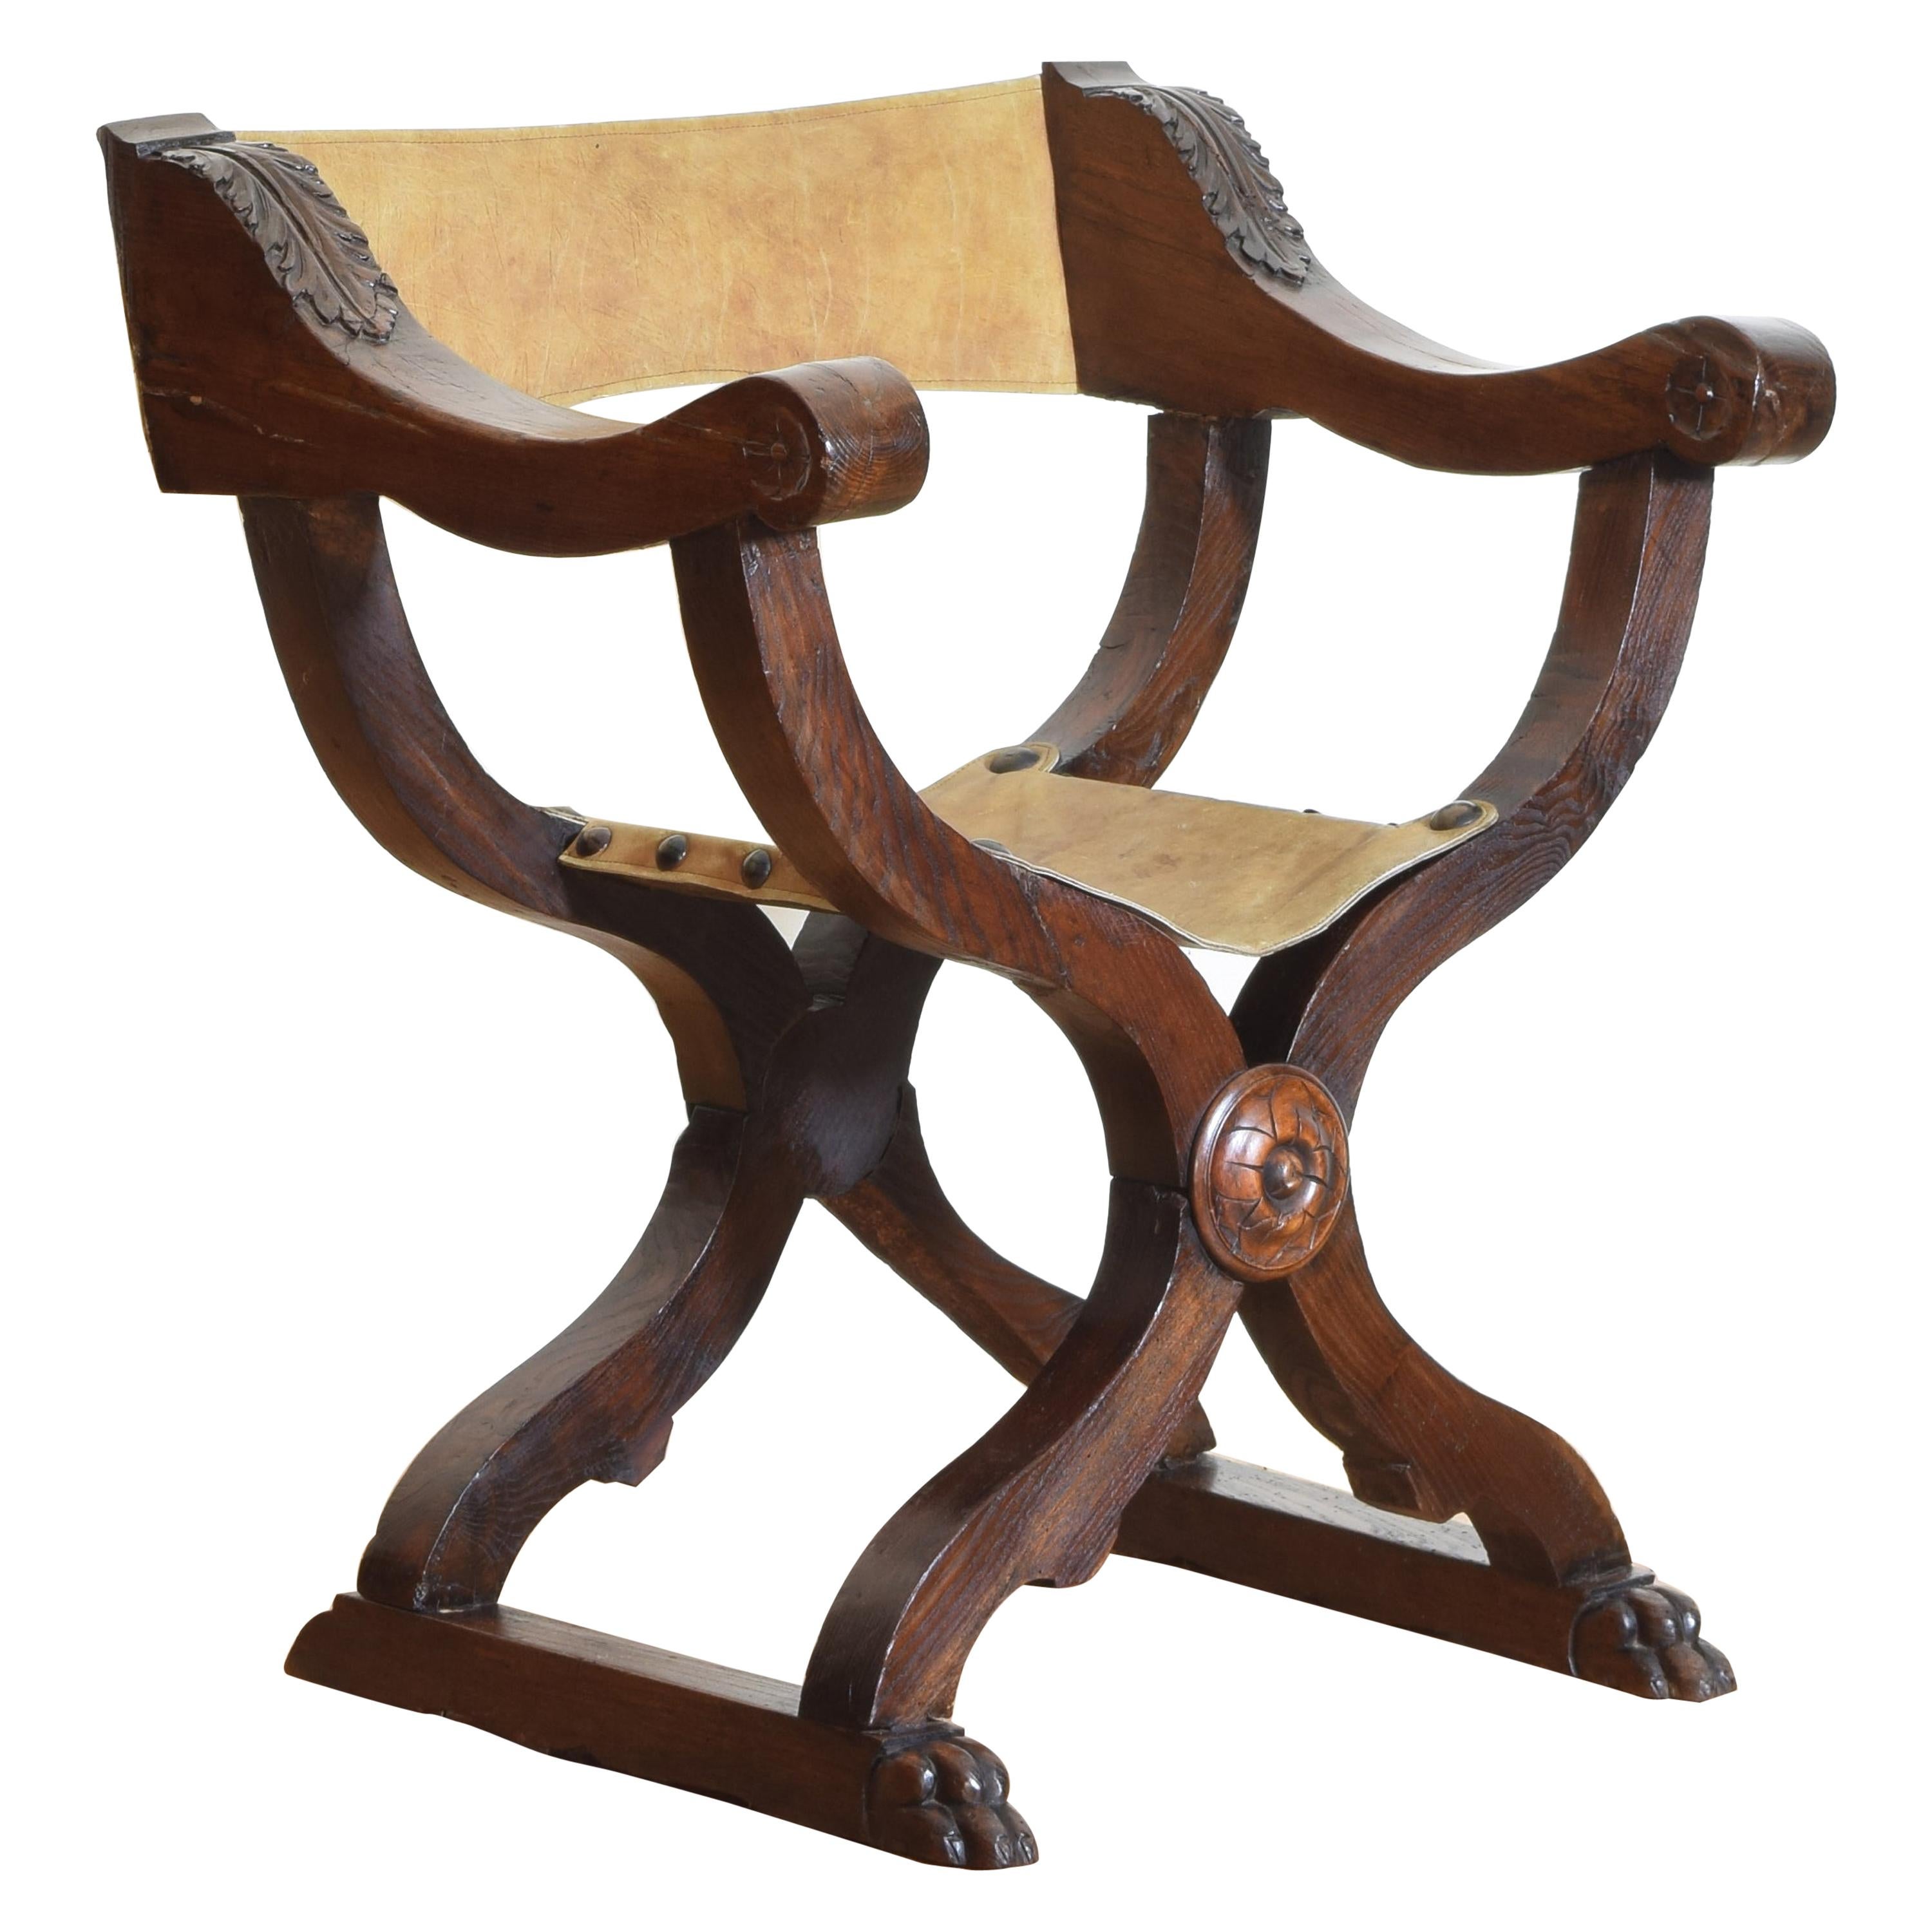 Italian Baroque Style Carved Ashwood Savonarola Chair with Leather Seat, 19thc